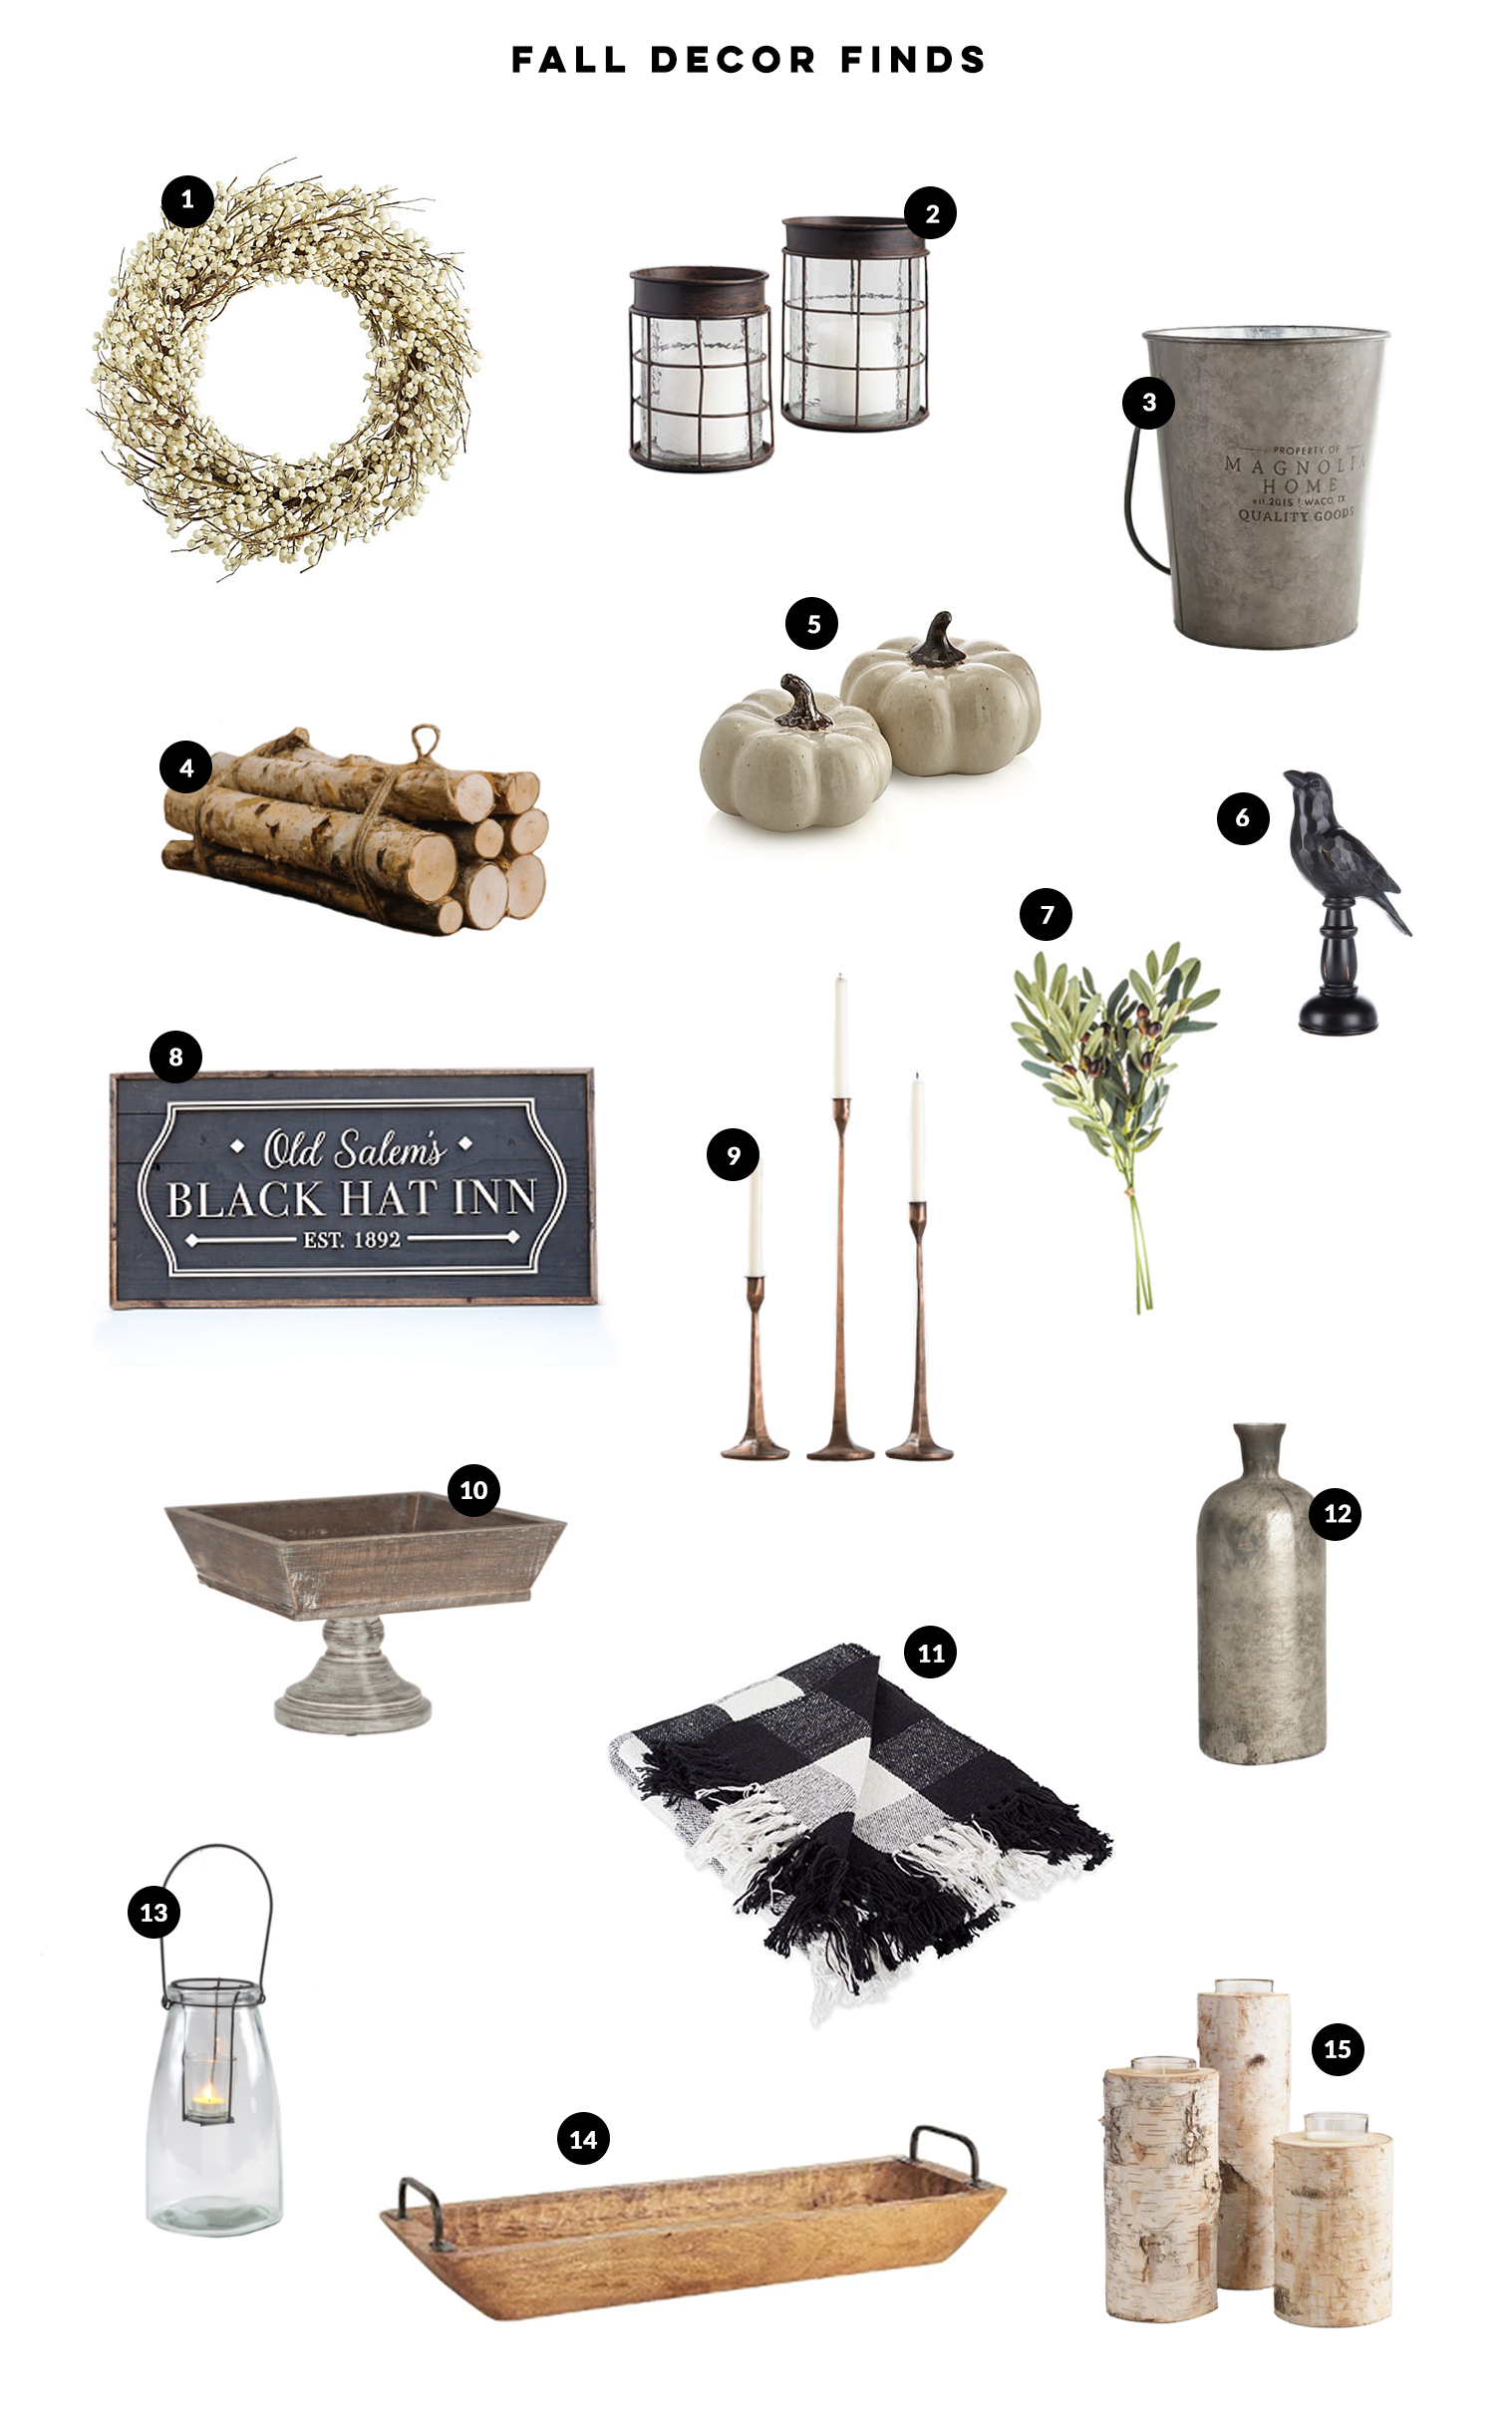 Favorite Fall decor finds for the season! From wreaths to lanterns and everything under $100. #Fall #FallDecor #FallDecorIdeas #ModernFarmhouse #FallDecorations #FallDecorIdeasForTheHome